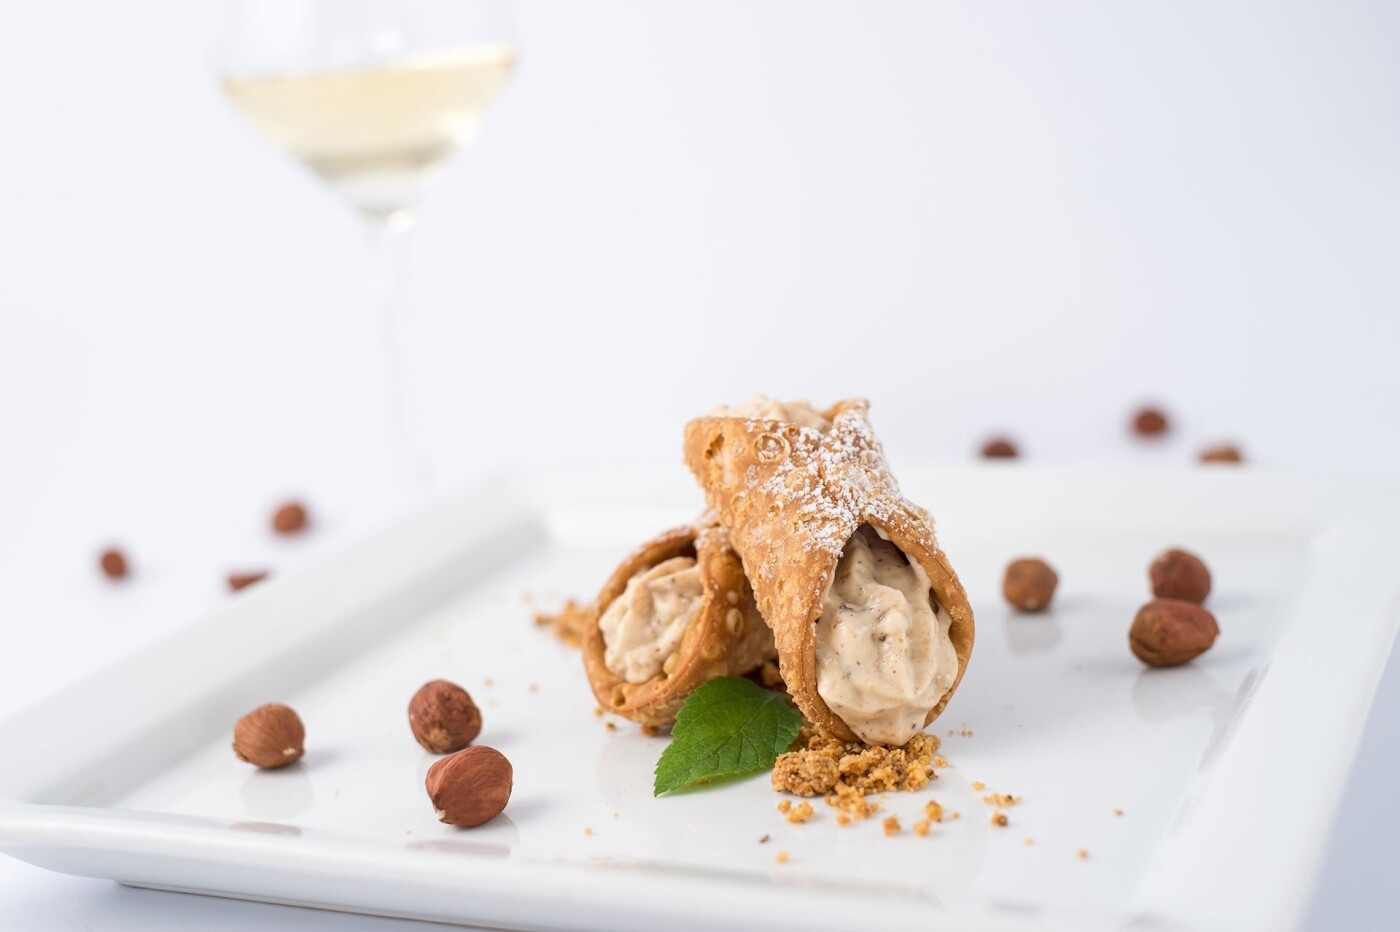 Cannoli with hazelnut cream - The idea was to showcase the ingredients and to get people to strive for the dessert. The white wine in the background is a great selection that goes with it.